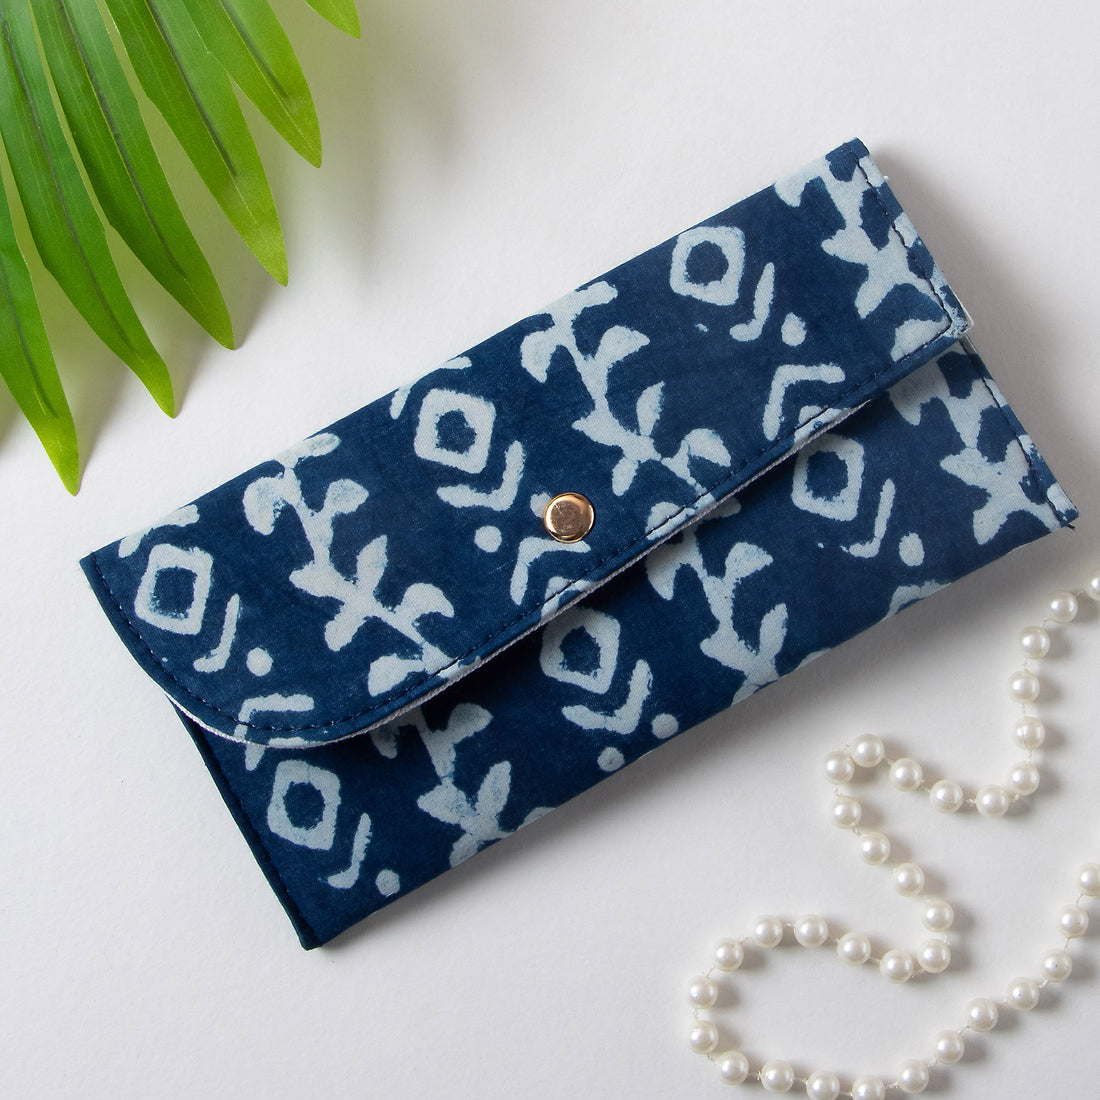 Beautiful Clutches For Daily Use